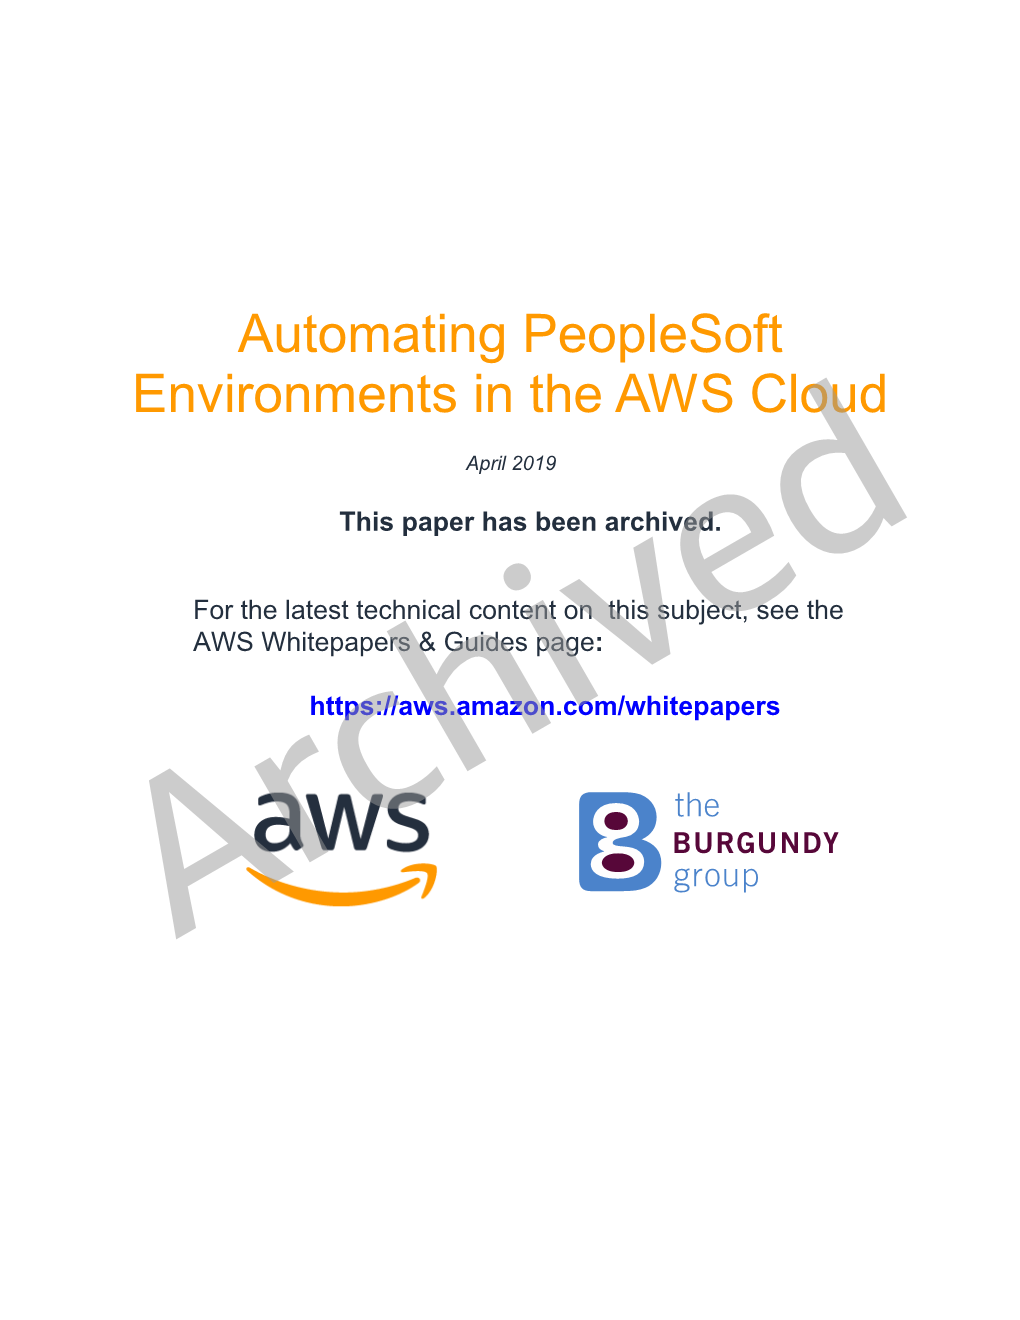 Automating Peoplesoft Environments in the AWS Cloud